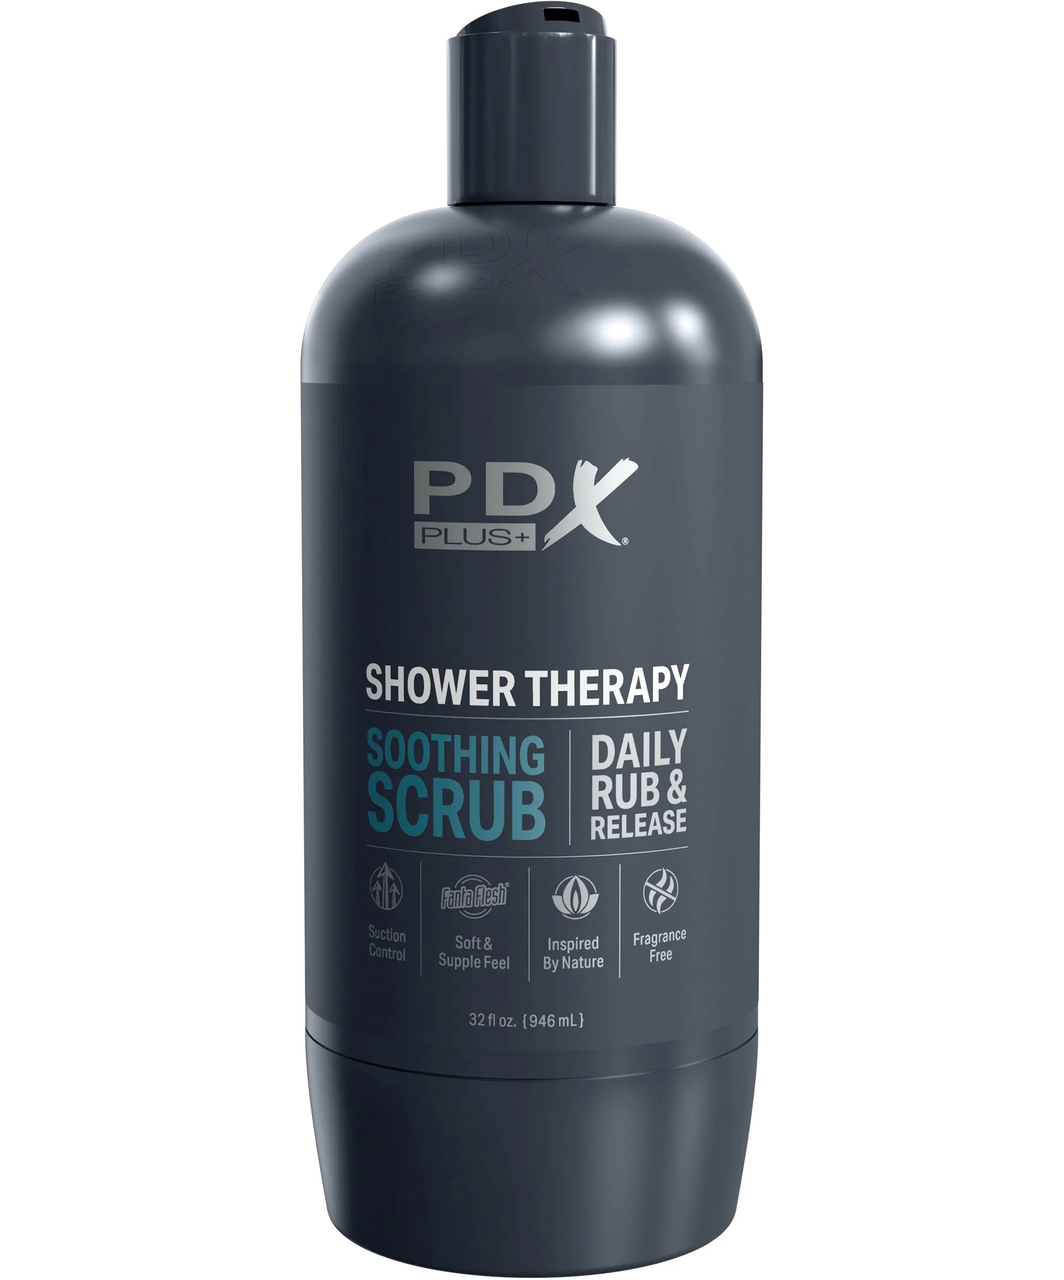 Pipedream PDX Plus Soothing Scrub Shower Therapy masturbators